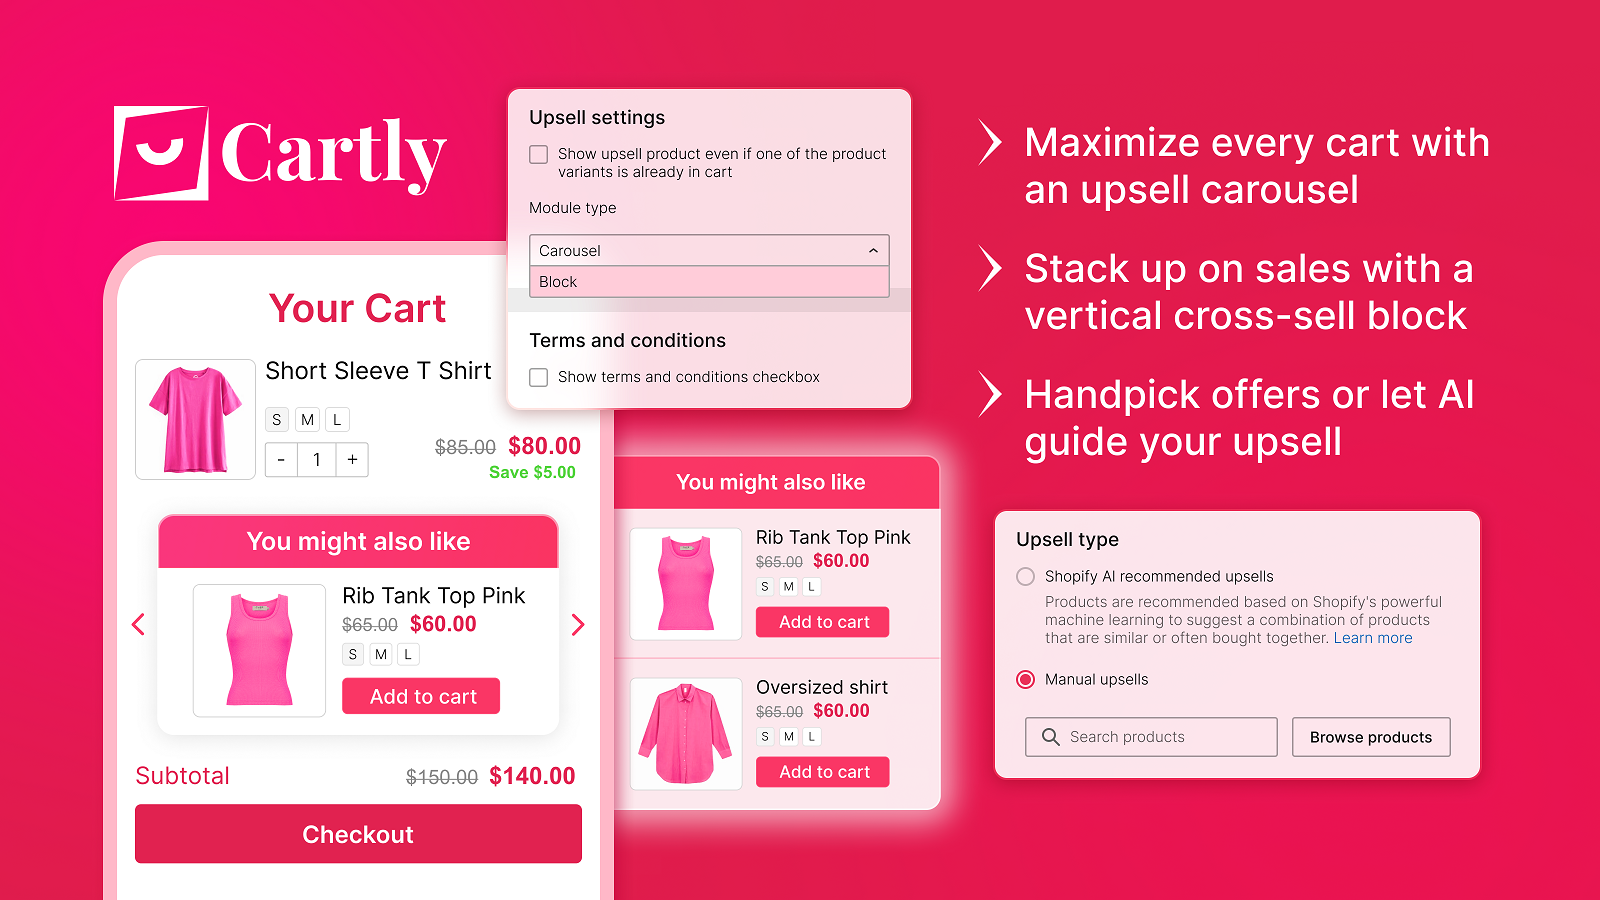 upsell-cross-sell carousel or vertical value block in your cart